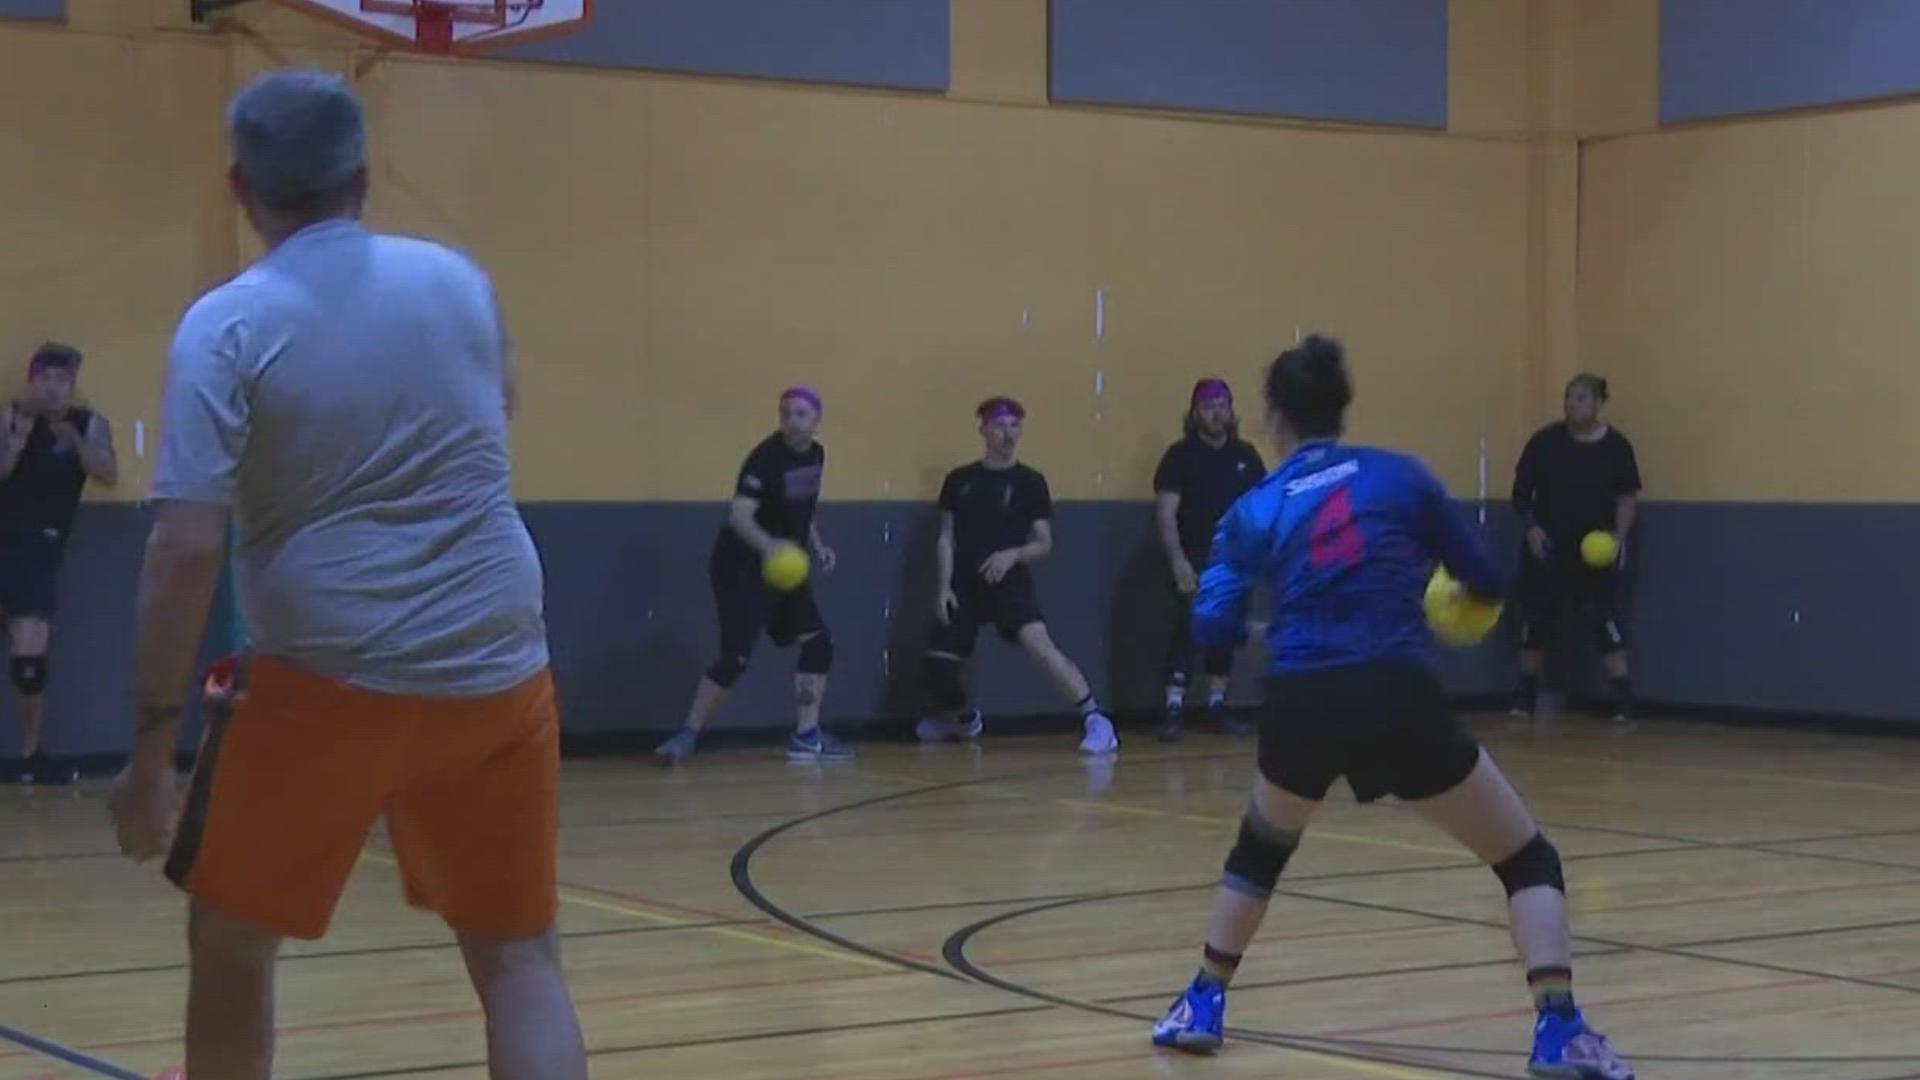 The team is headed to Austria for the dodgeball world championships. The players say they hope to see dodgeball one day become an Olympic sport.